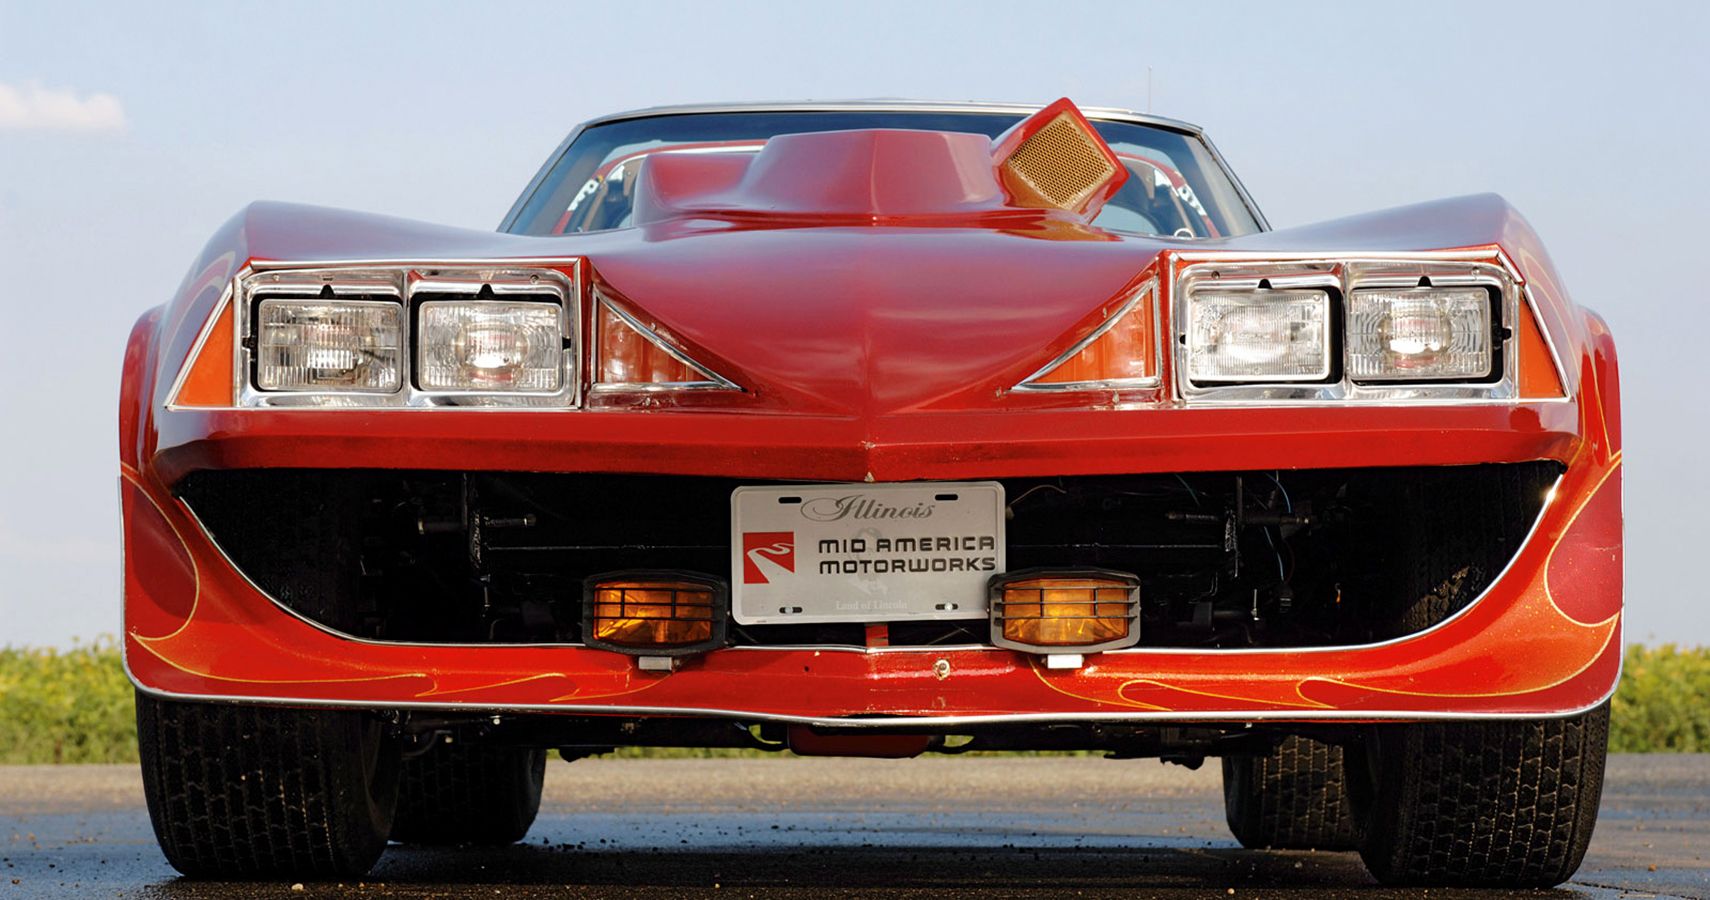 The Actual Car Underneath All That Body Paneling Was A 1973 Corvette C3 With An L48 5.7-Liter V8 Engine